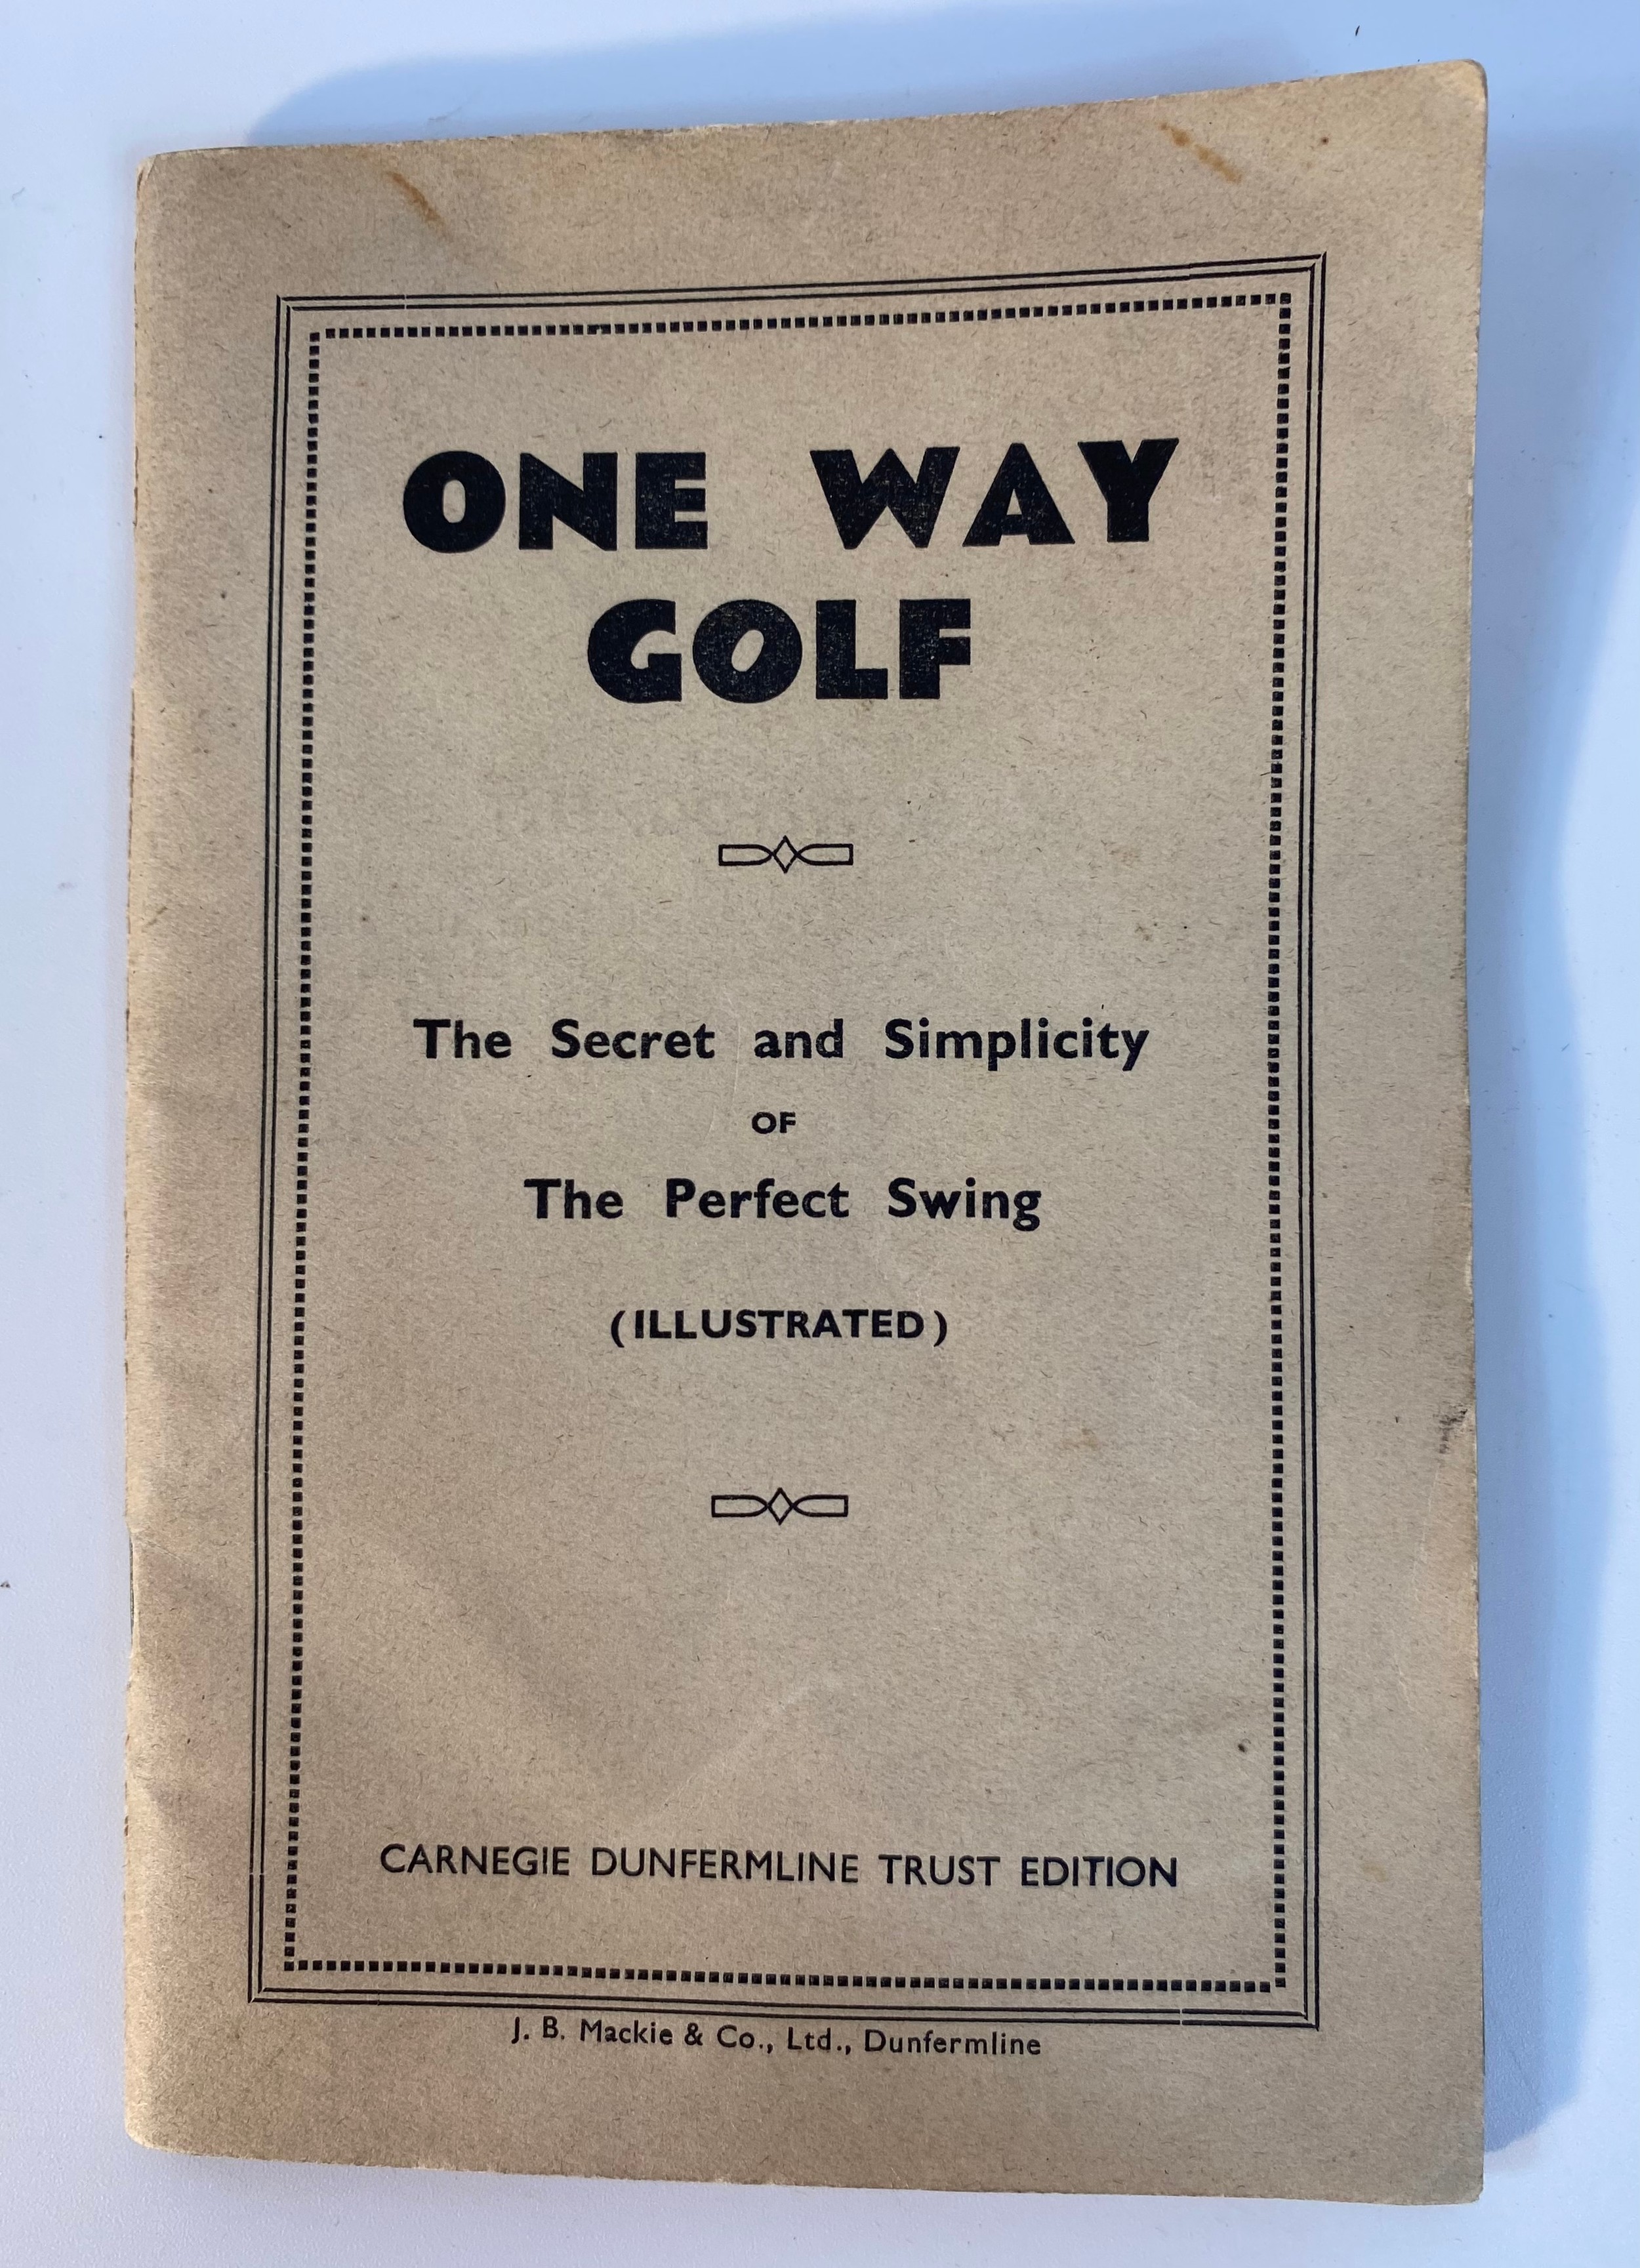 A Carnegie Dunfermline trust 'One way golf' book The secret and simplicity of the perfect swing - Image 2 of 14